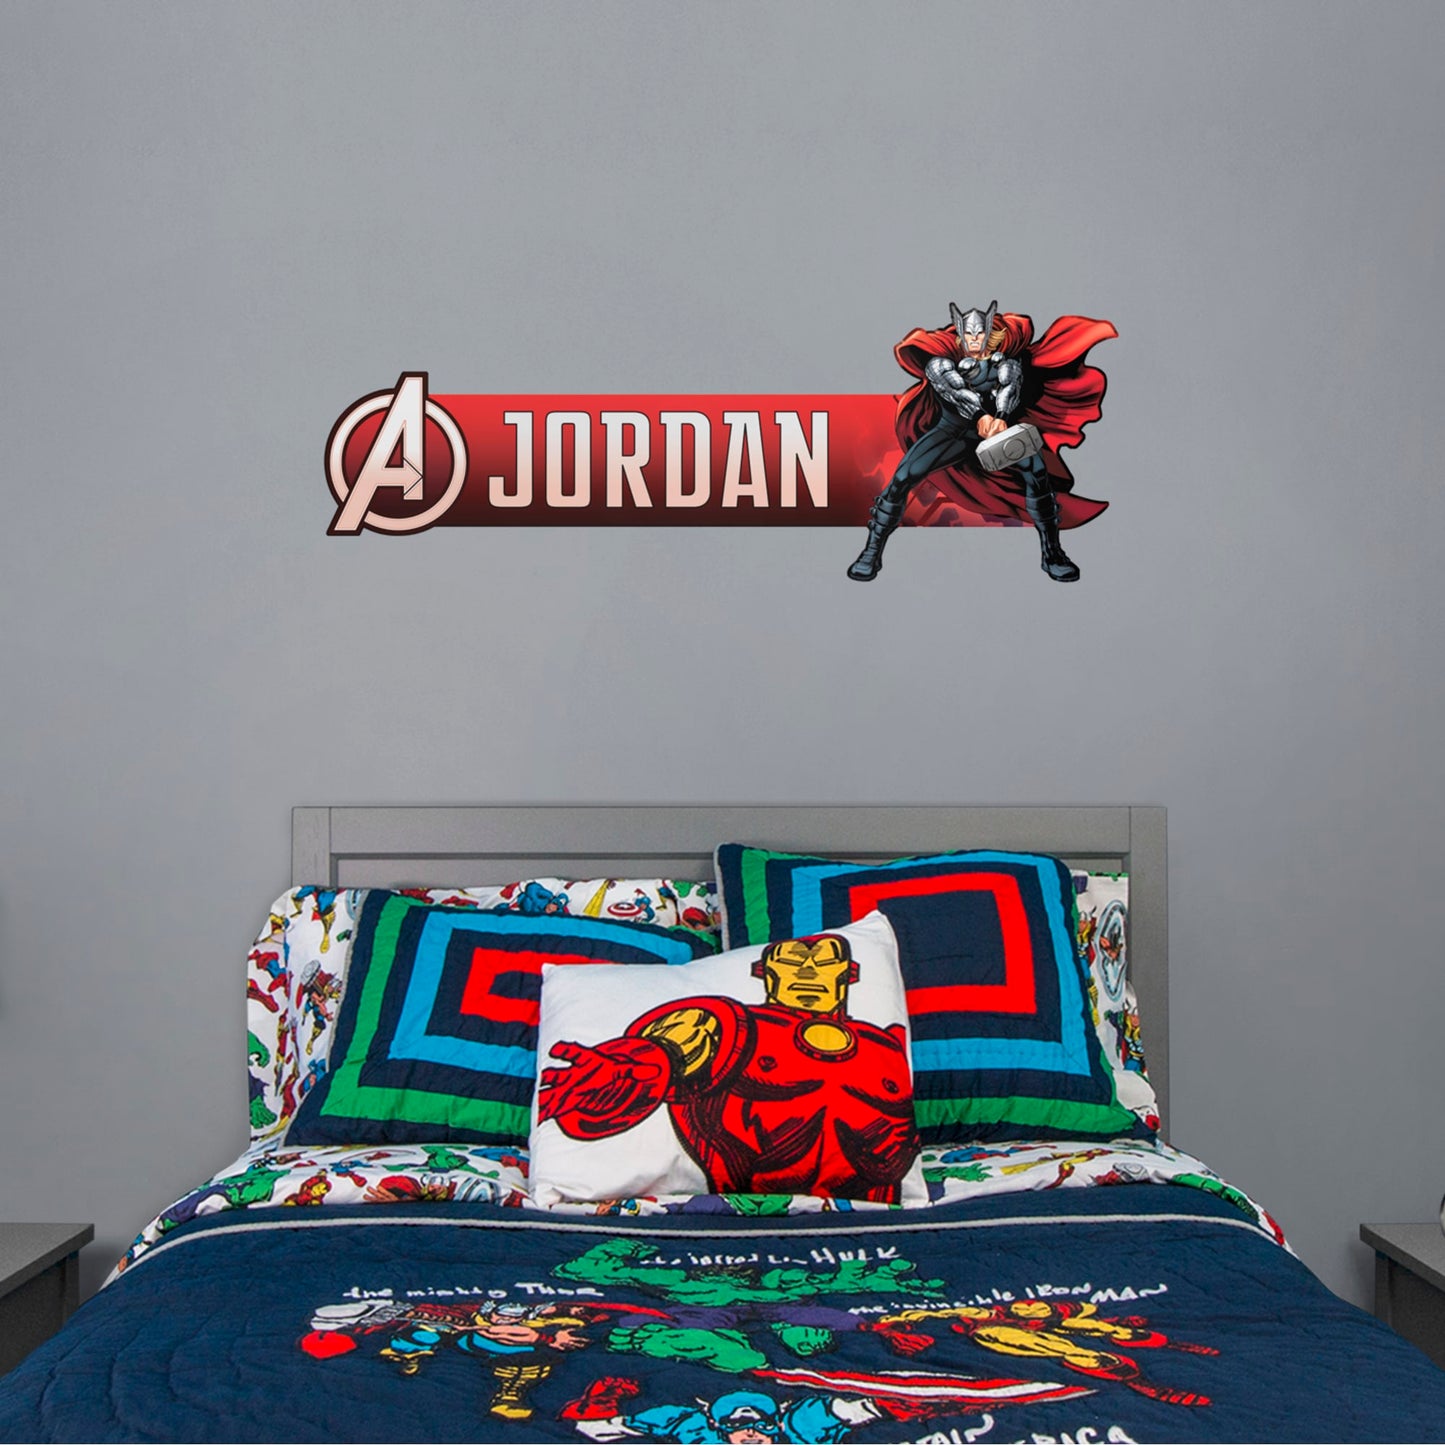 Thor: Personalized Name - Officially Licensed Removable Wall Decal